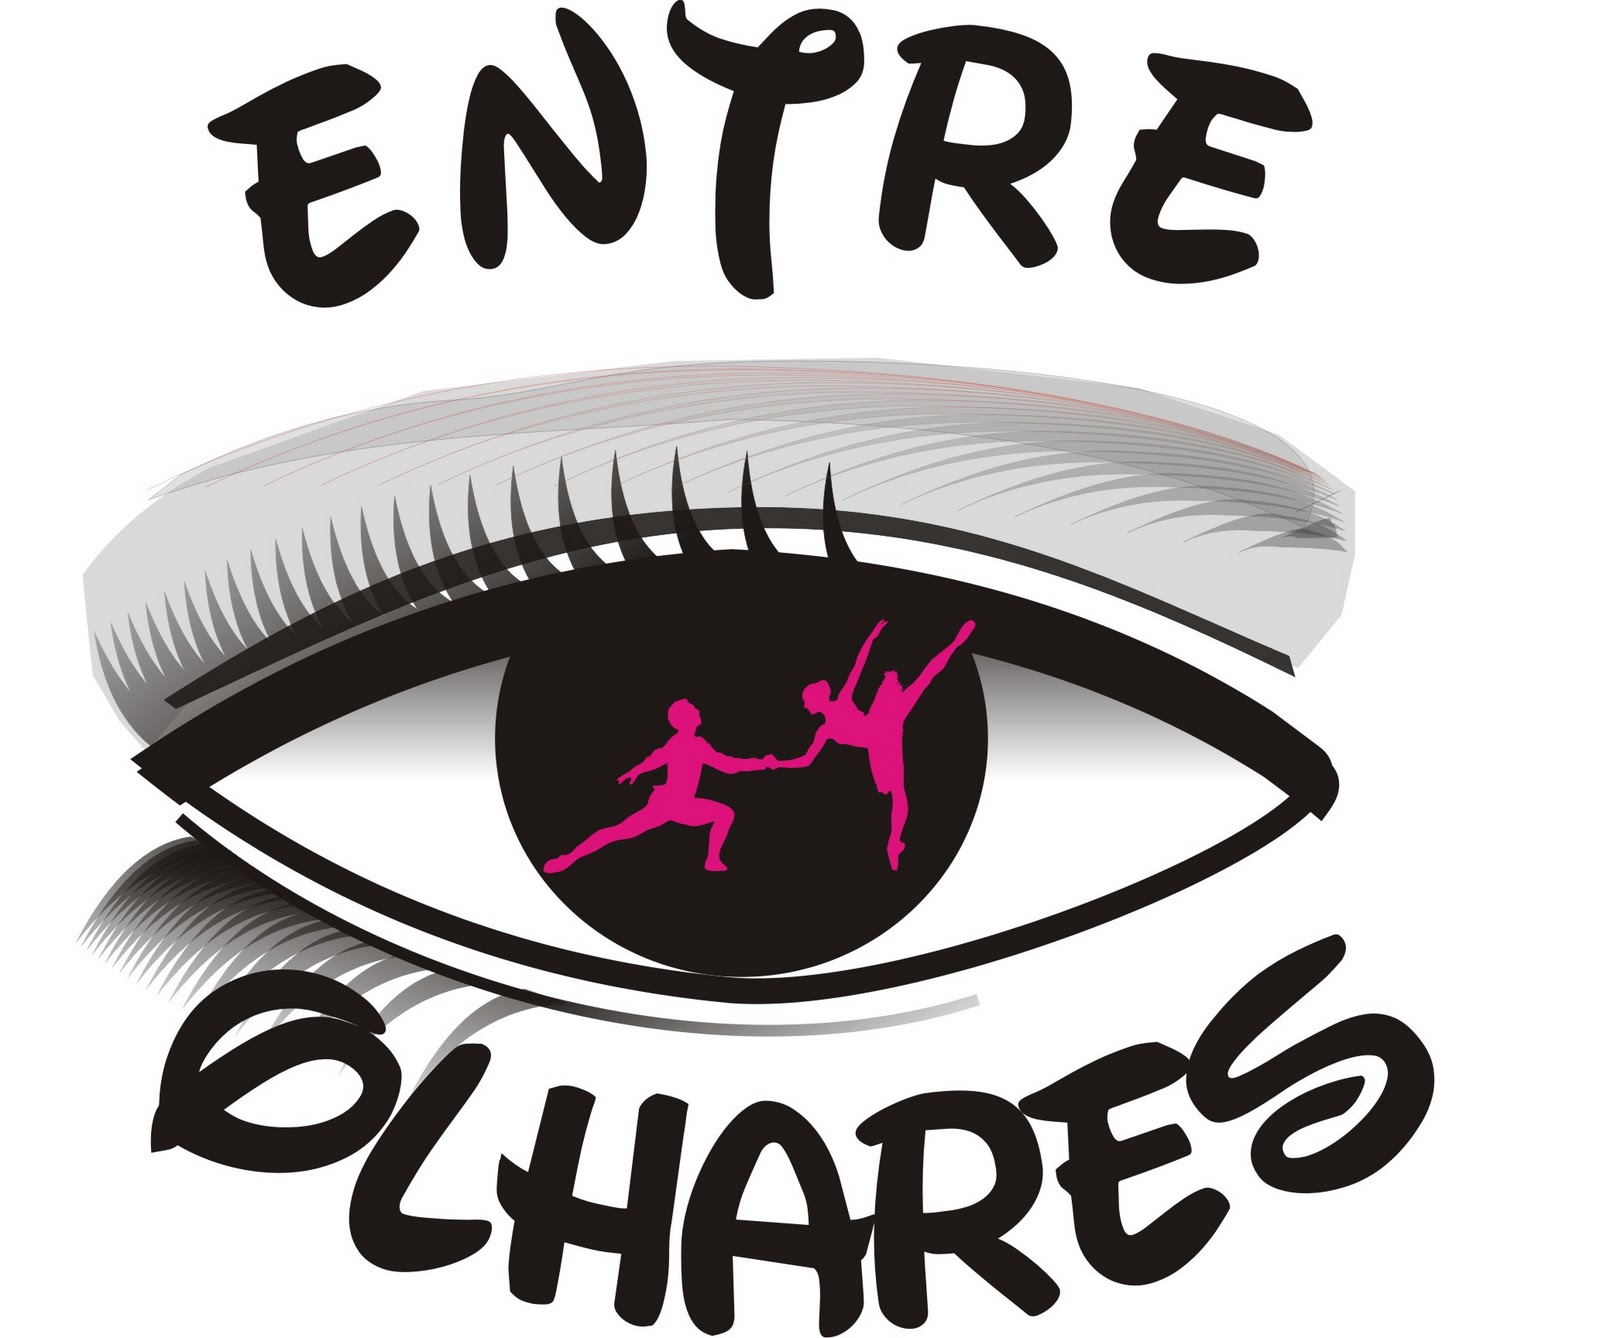 EntreOlhares